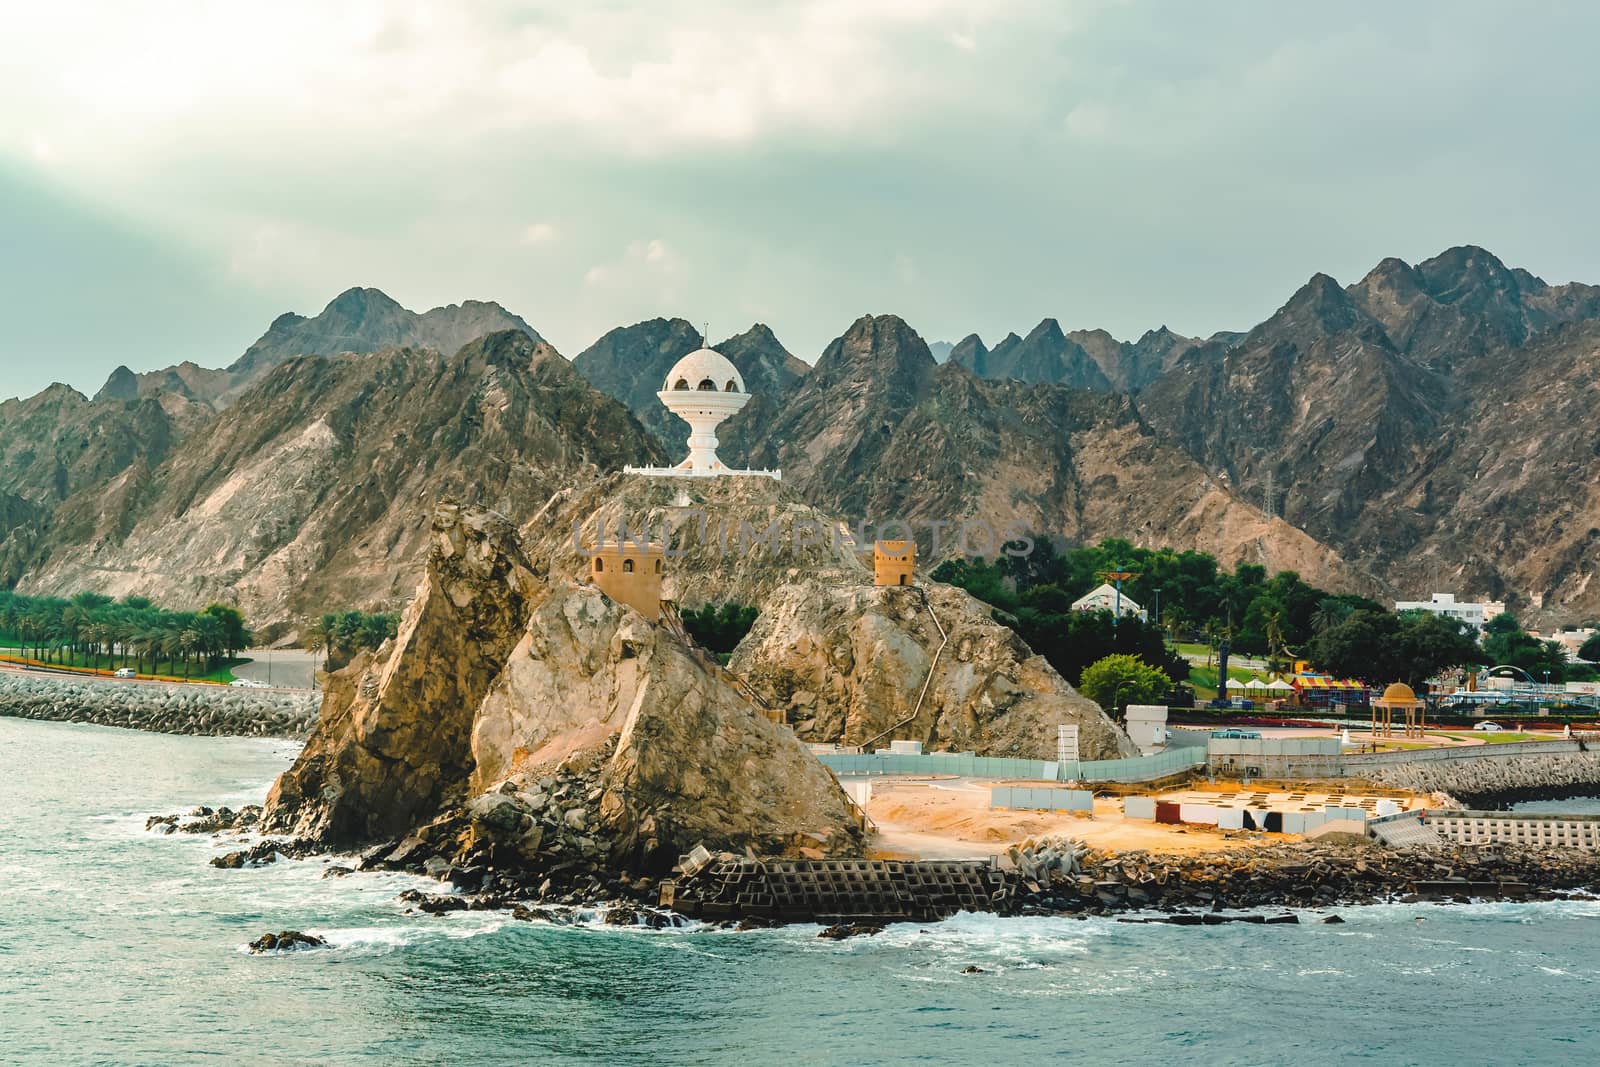 Muscat, Oman - December 16, 2018: view of the Riyam Park Monument from the sea by galsand